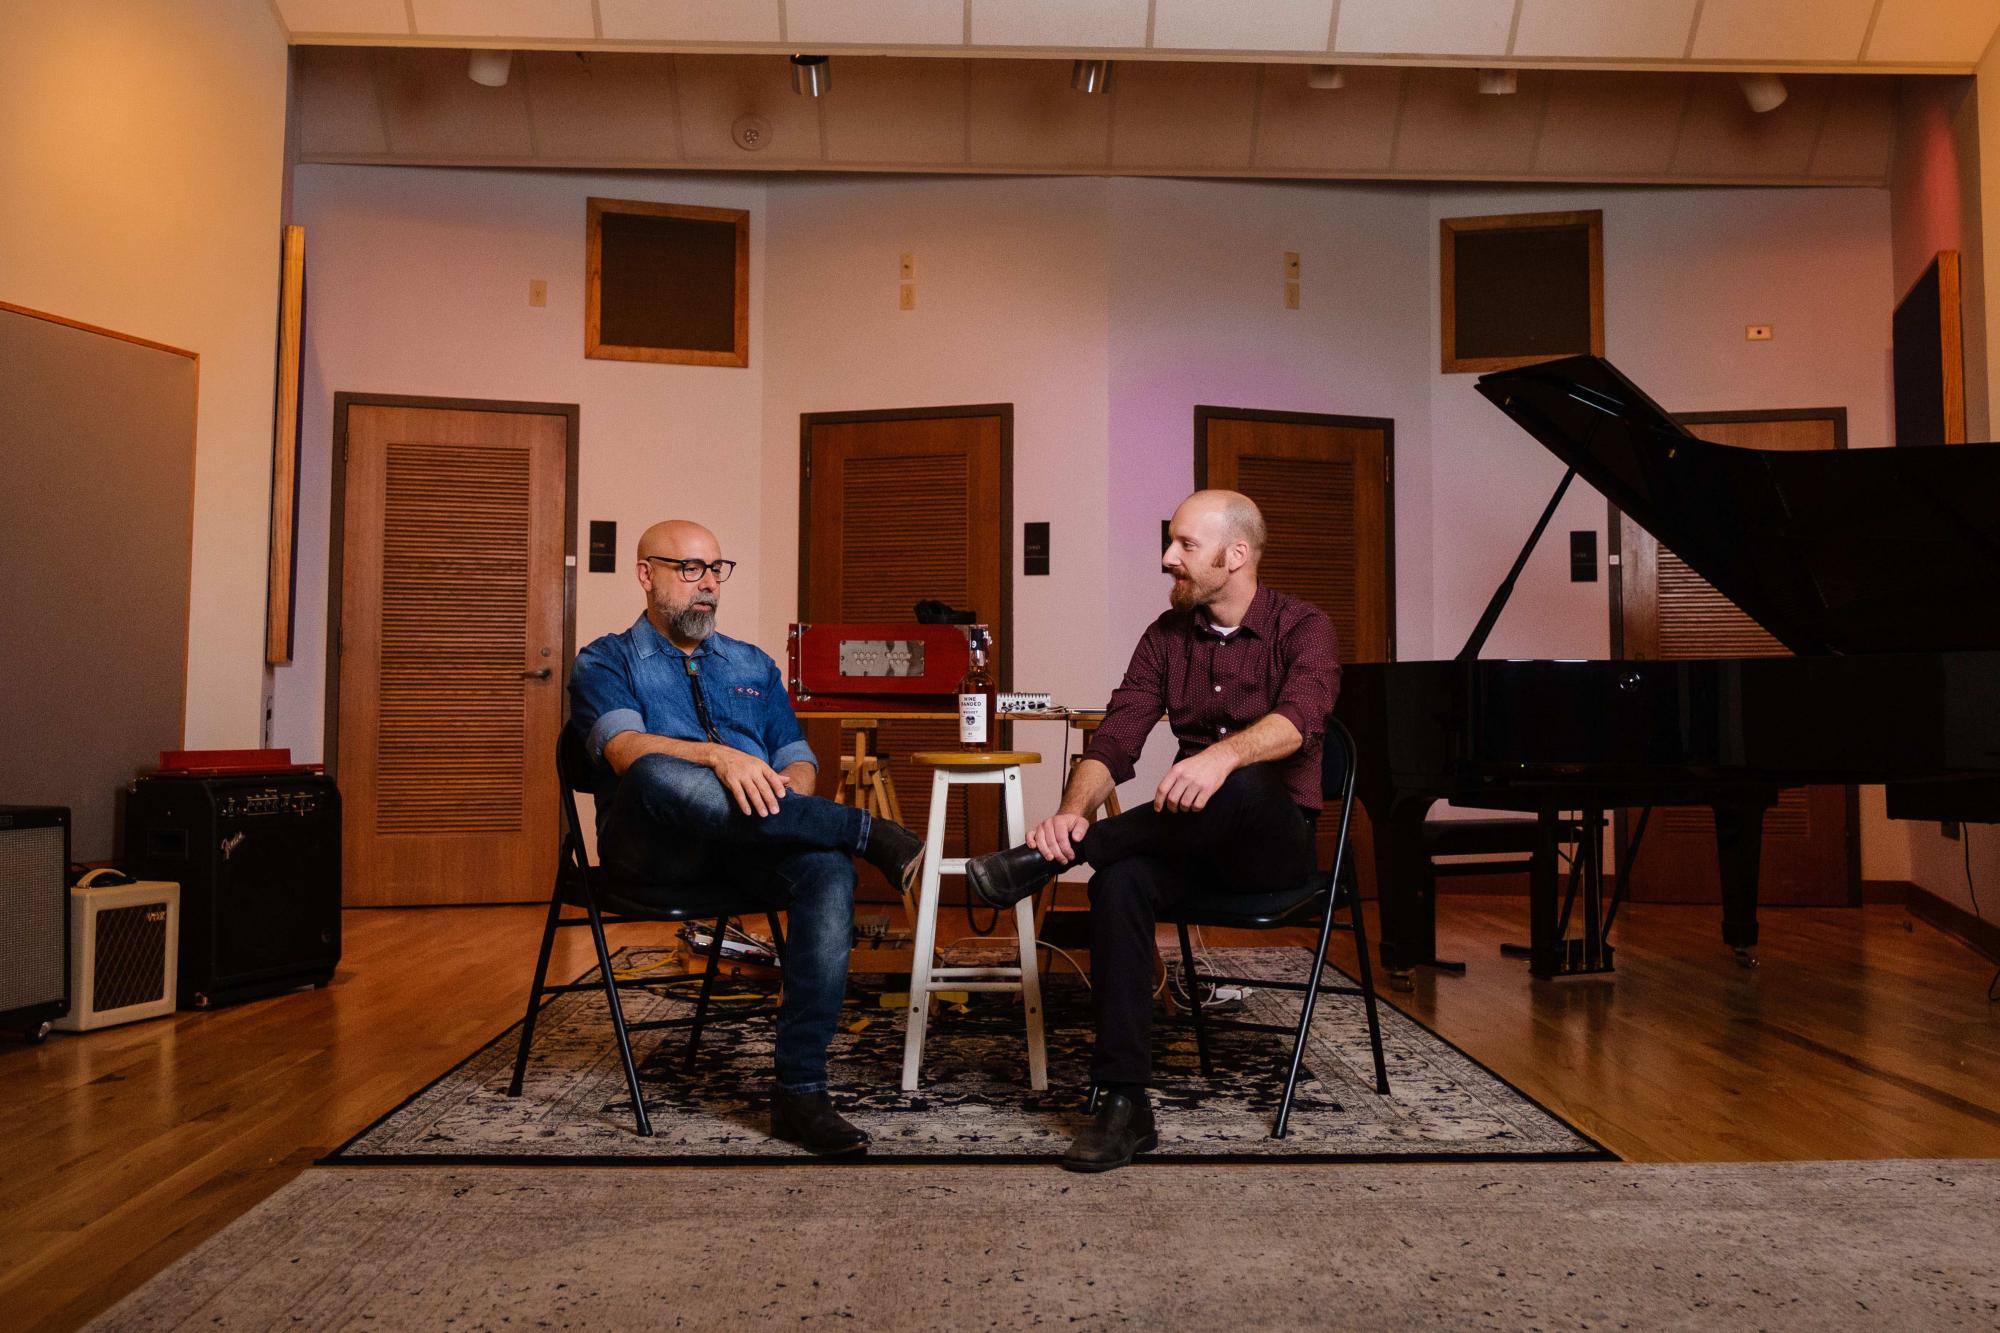 Recording Services Manager Andrew Stoltz and Composition Lecturer Russell Podgorsek having a conversation in the Live Room. Photo by Nathan Russell.